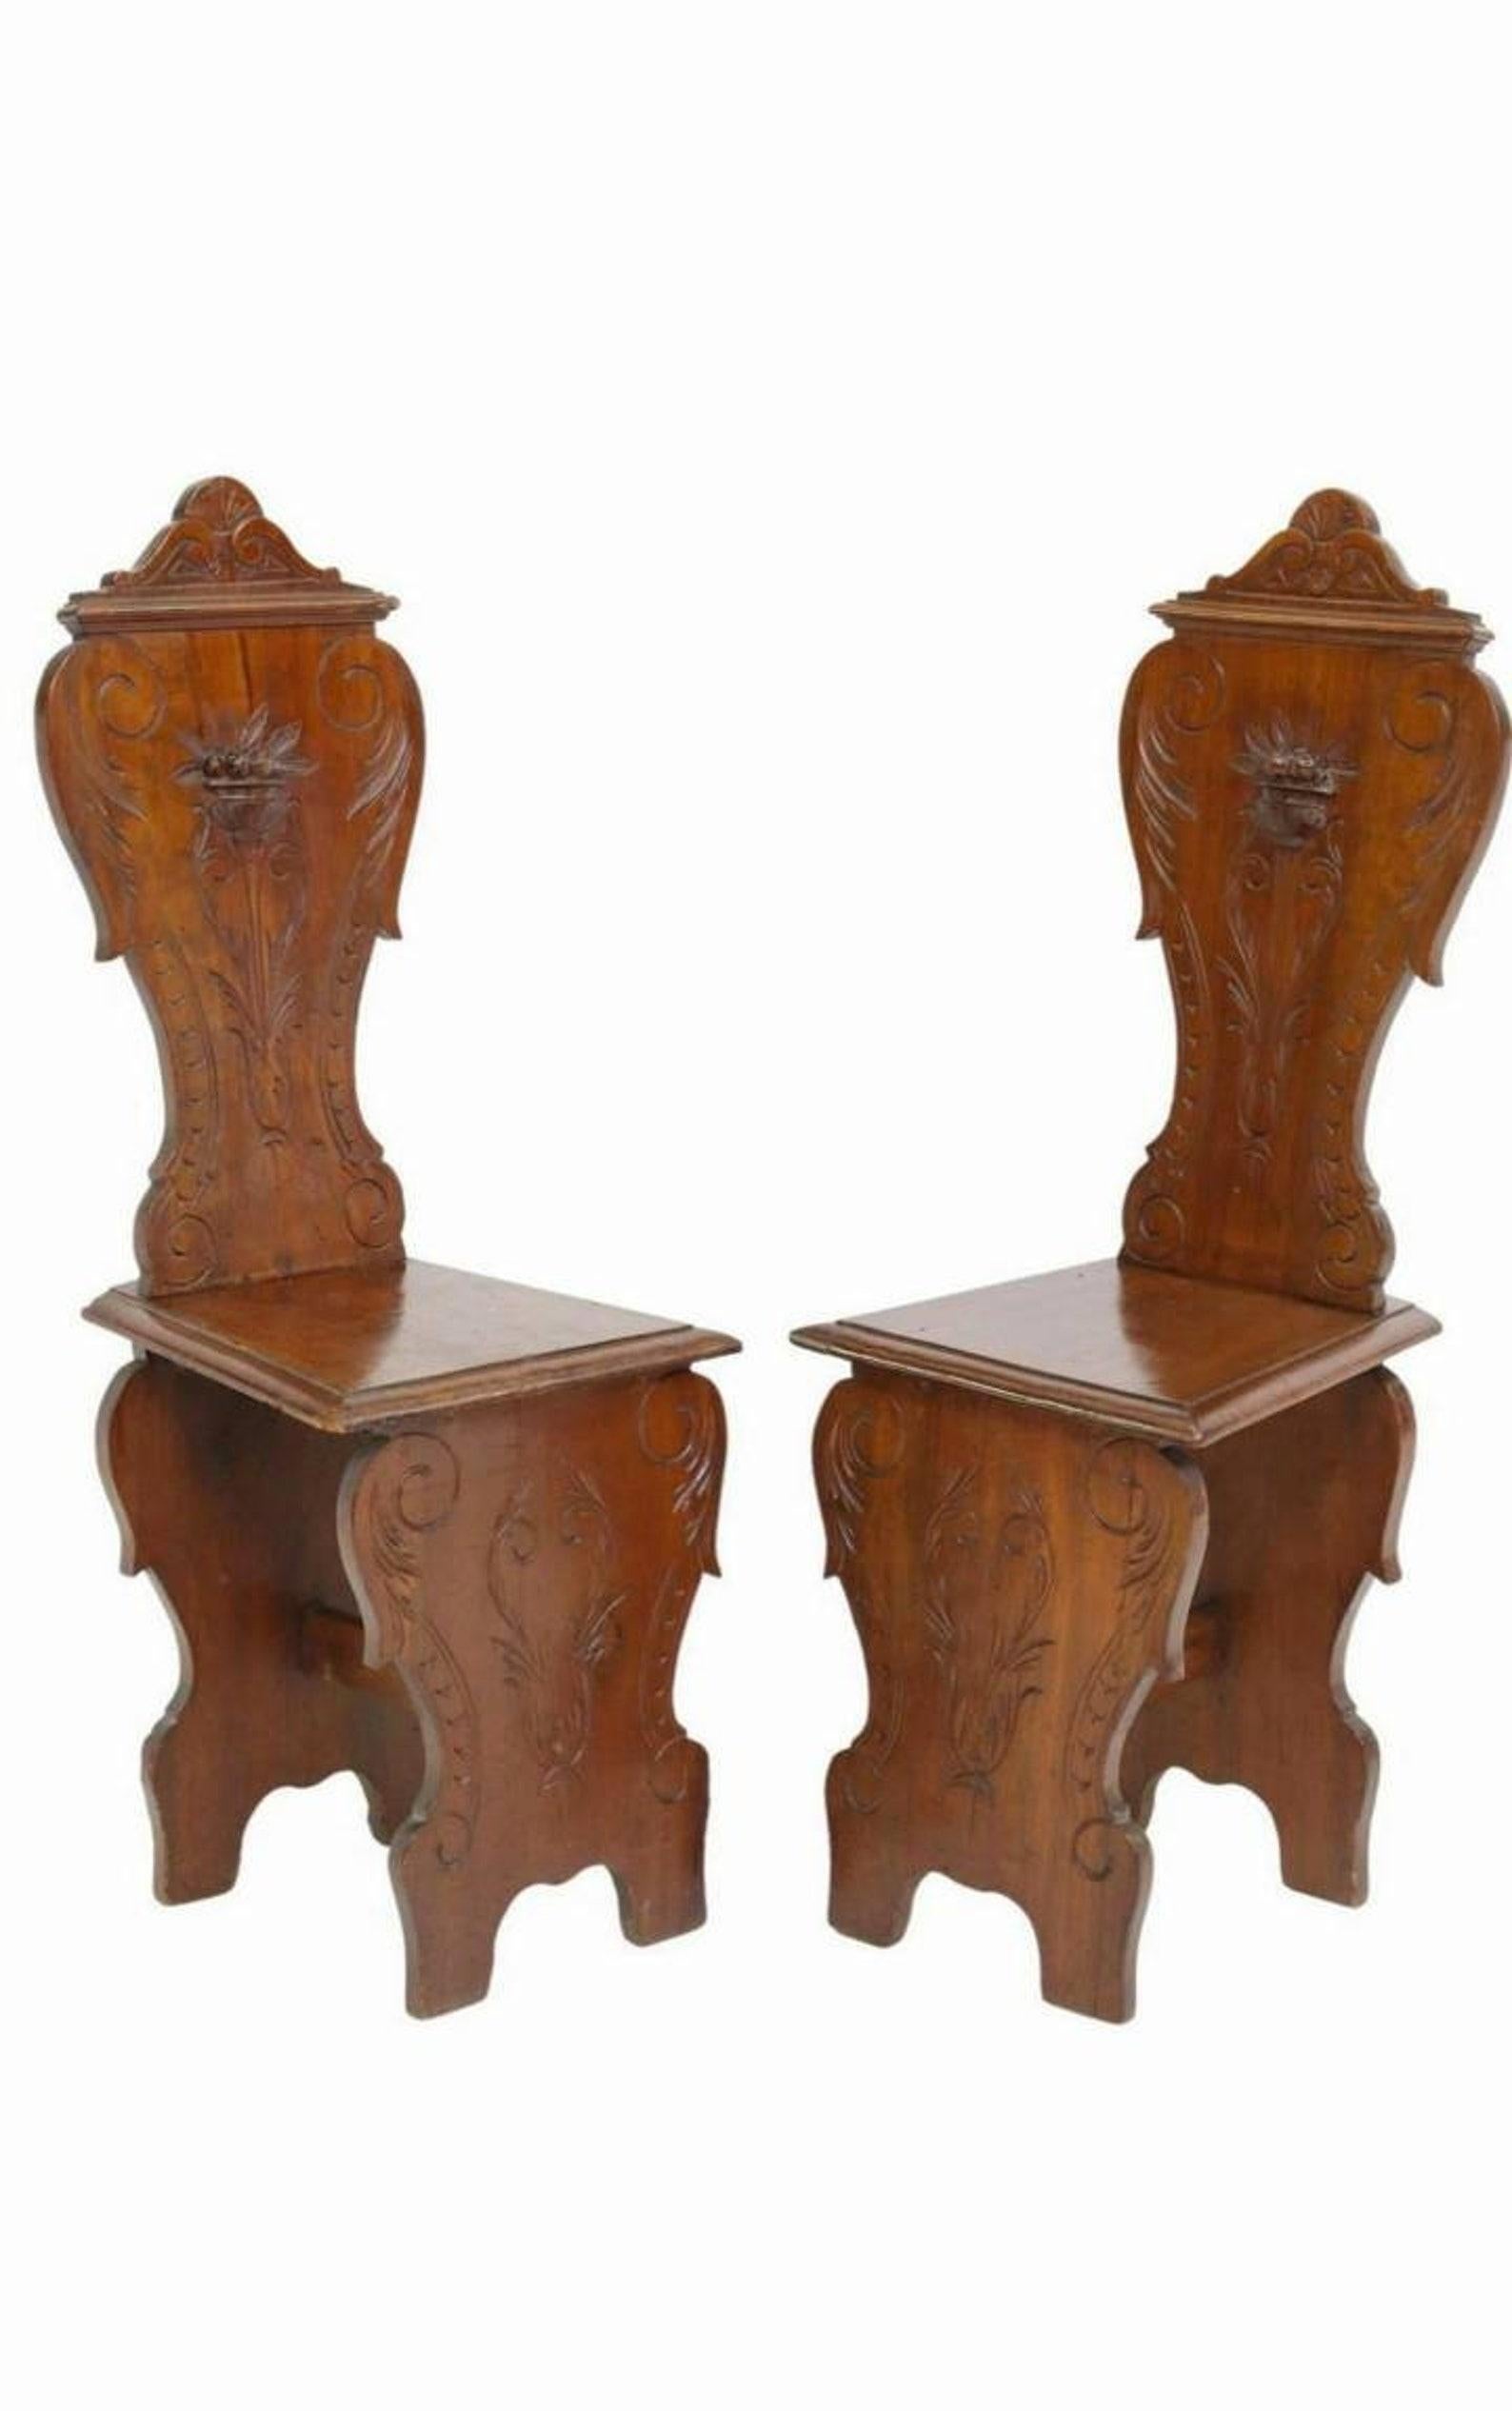 A pair of antique, circa 1830, Italian Renaissance style hand carved walnut sgabello hall chairs.

Hand-crafted in Provincial Italy, most likely Tuscan region of central Italy, in the first half of the 19th century.

This form of decorative